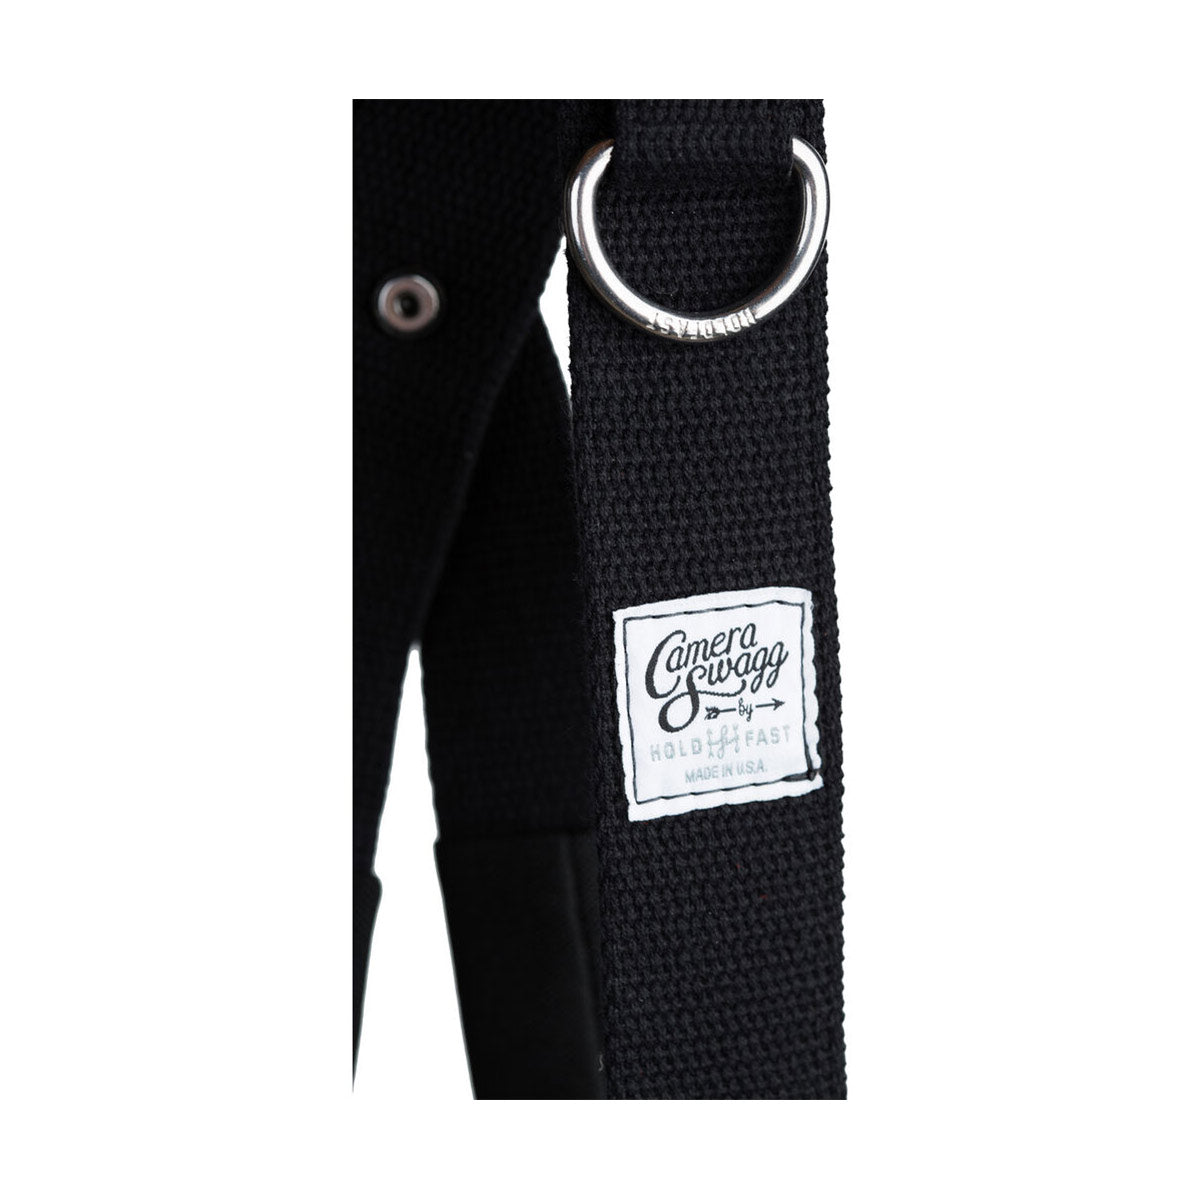 HoldFast Money Maker Two-Camera Swagg Harness (Cotton Canvas Black)